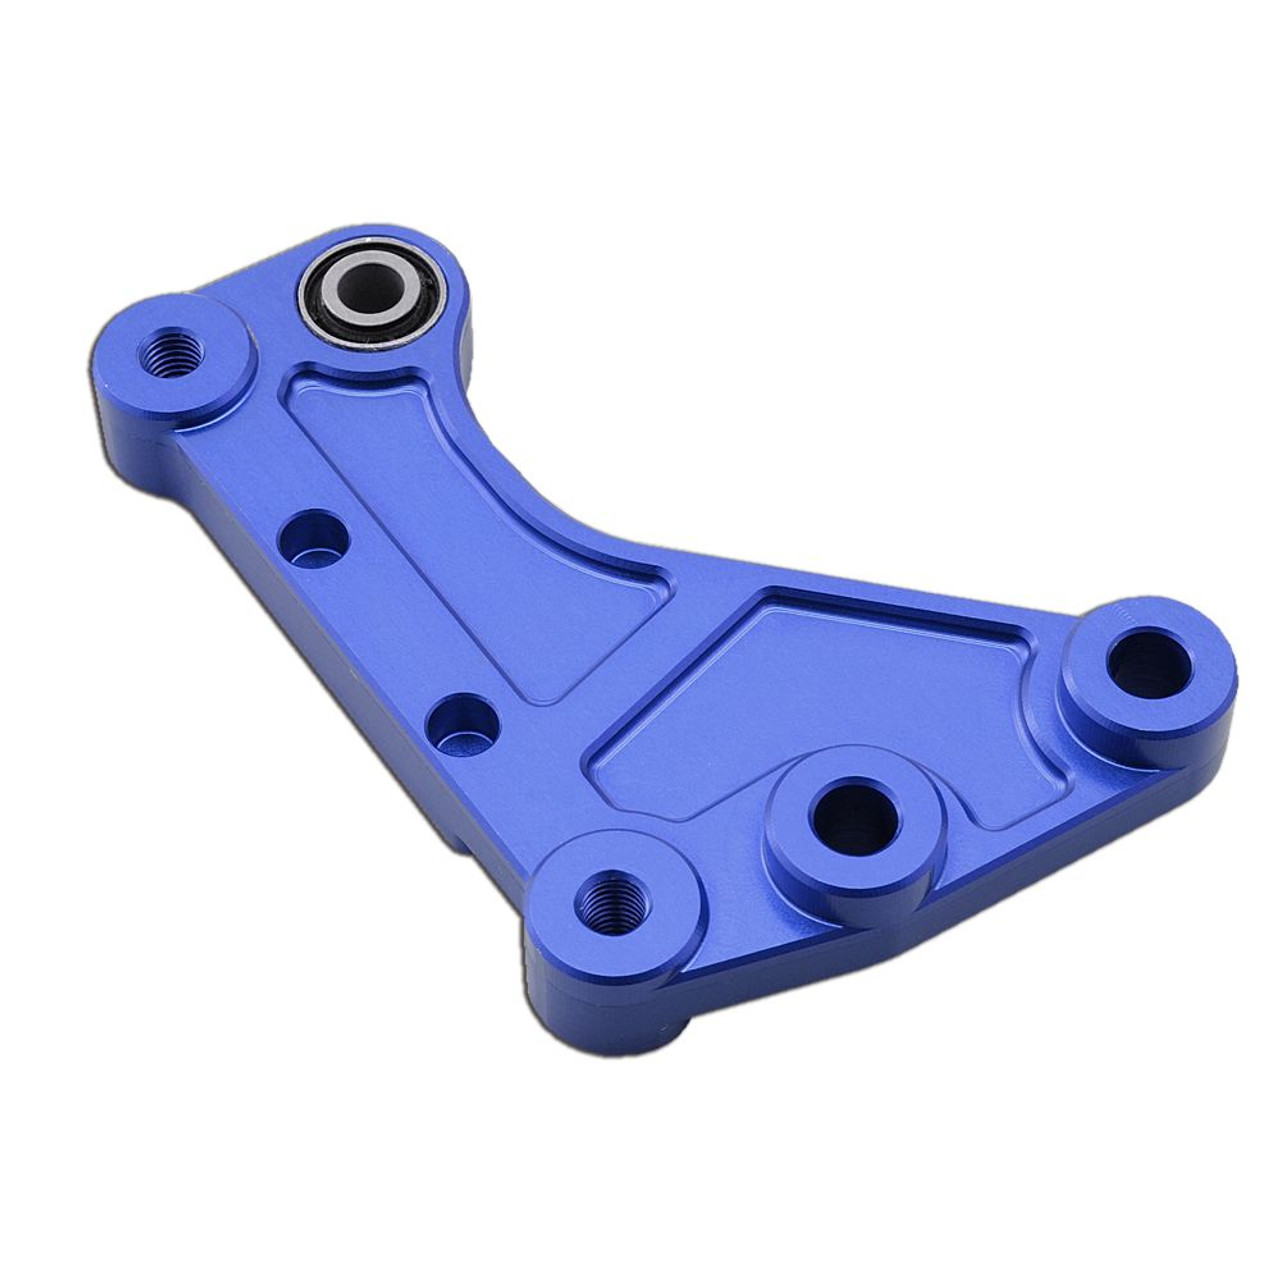 Low Down Plate, Rear Suspension, Blue, Yamaha Majesty